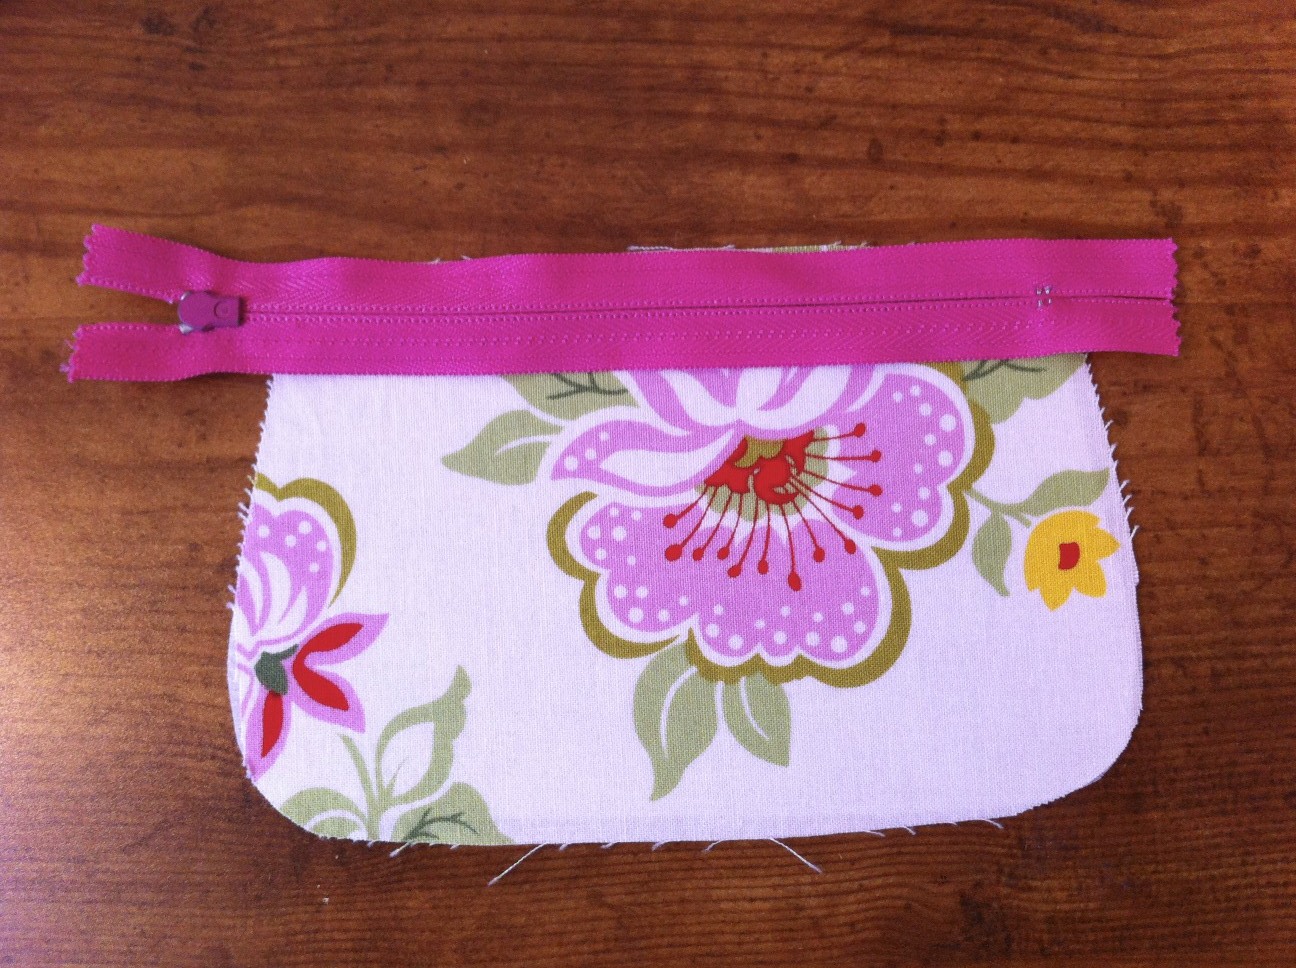 Sew Spoiled: Sweet Coin Purse Tutorial for Teacher Gifts